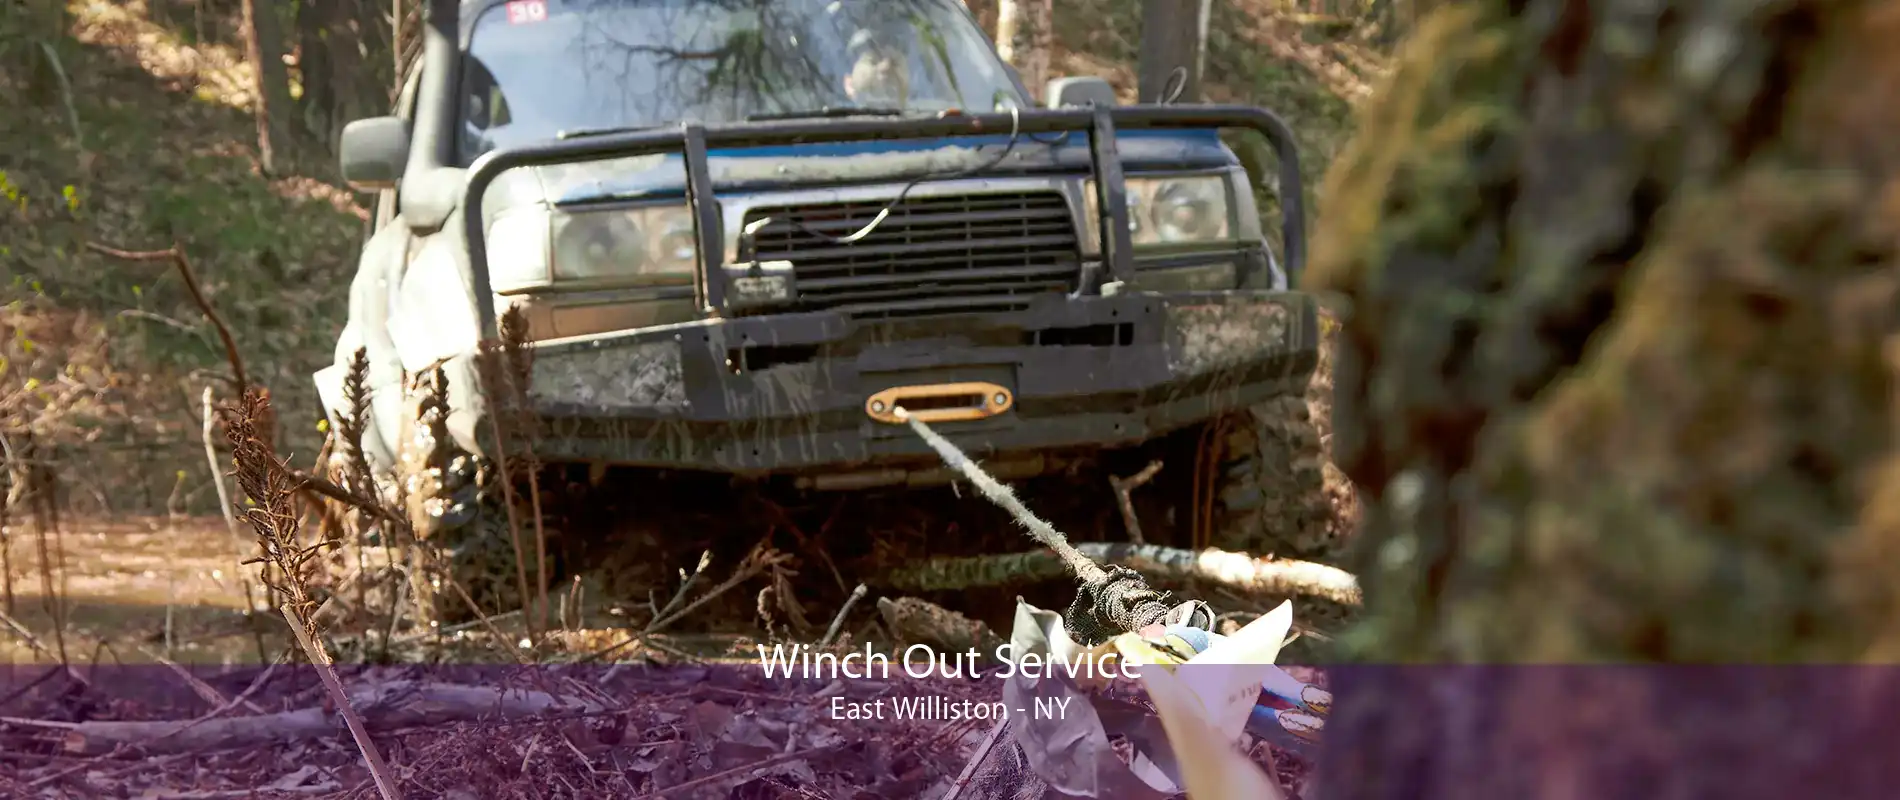 Winch Out Service East Williston - NY